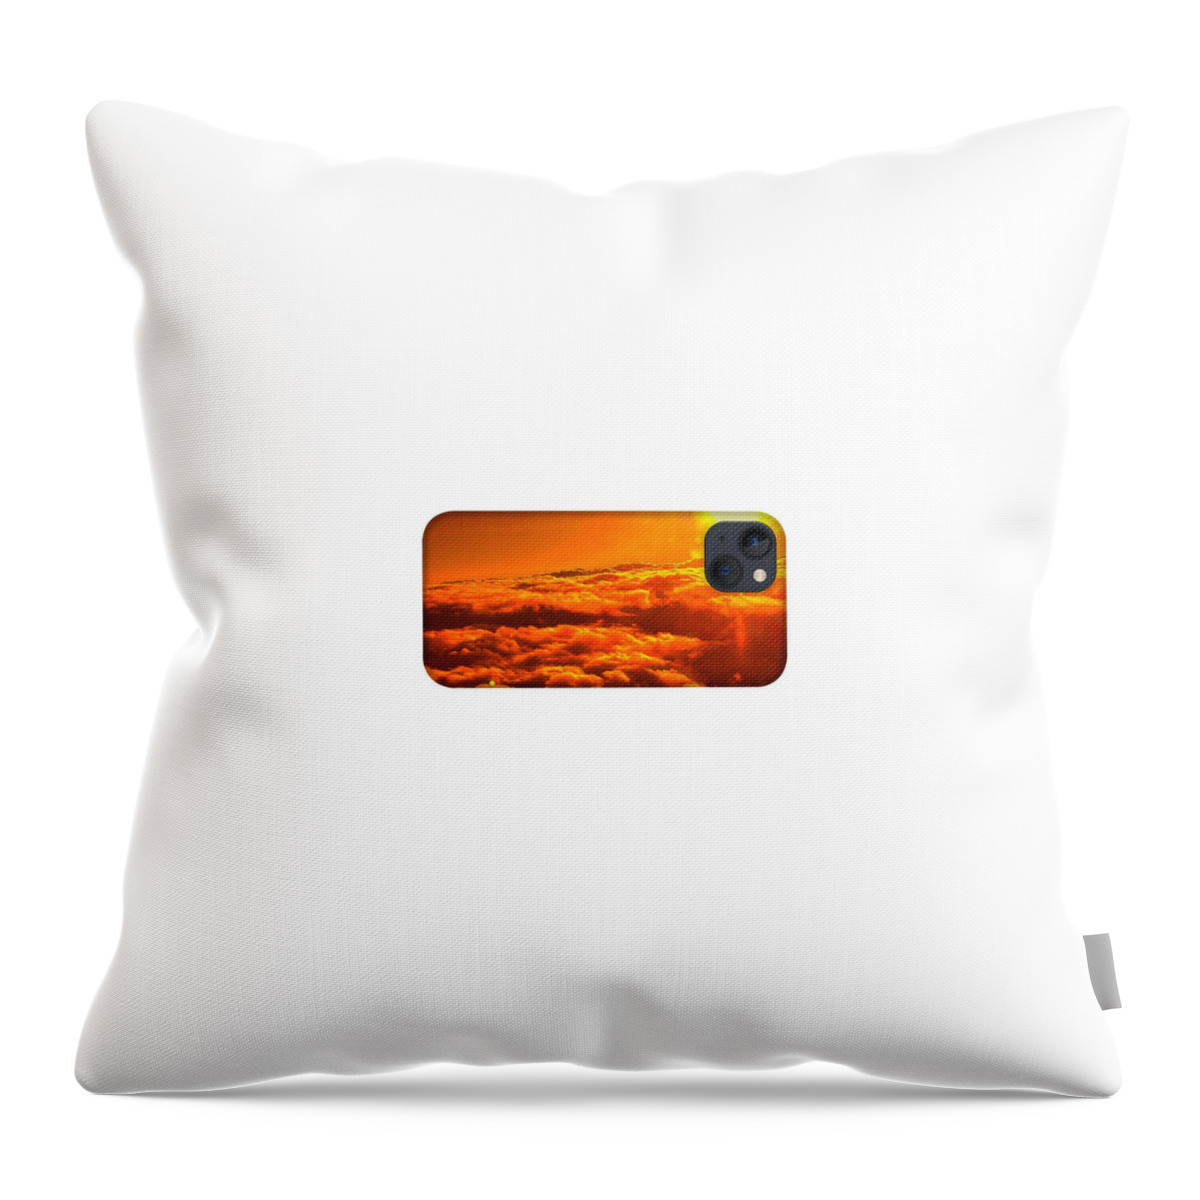  Throw Pillow featuring the photograph Sosobone Original 1 by Trevor A Smith